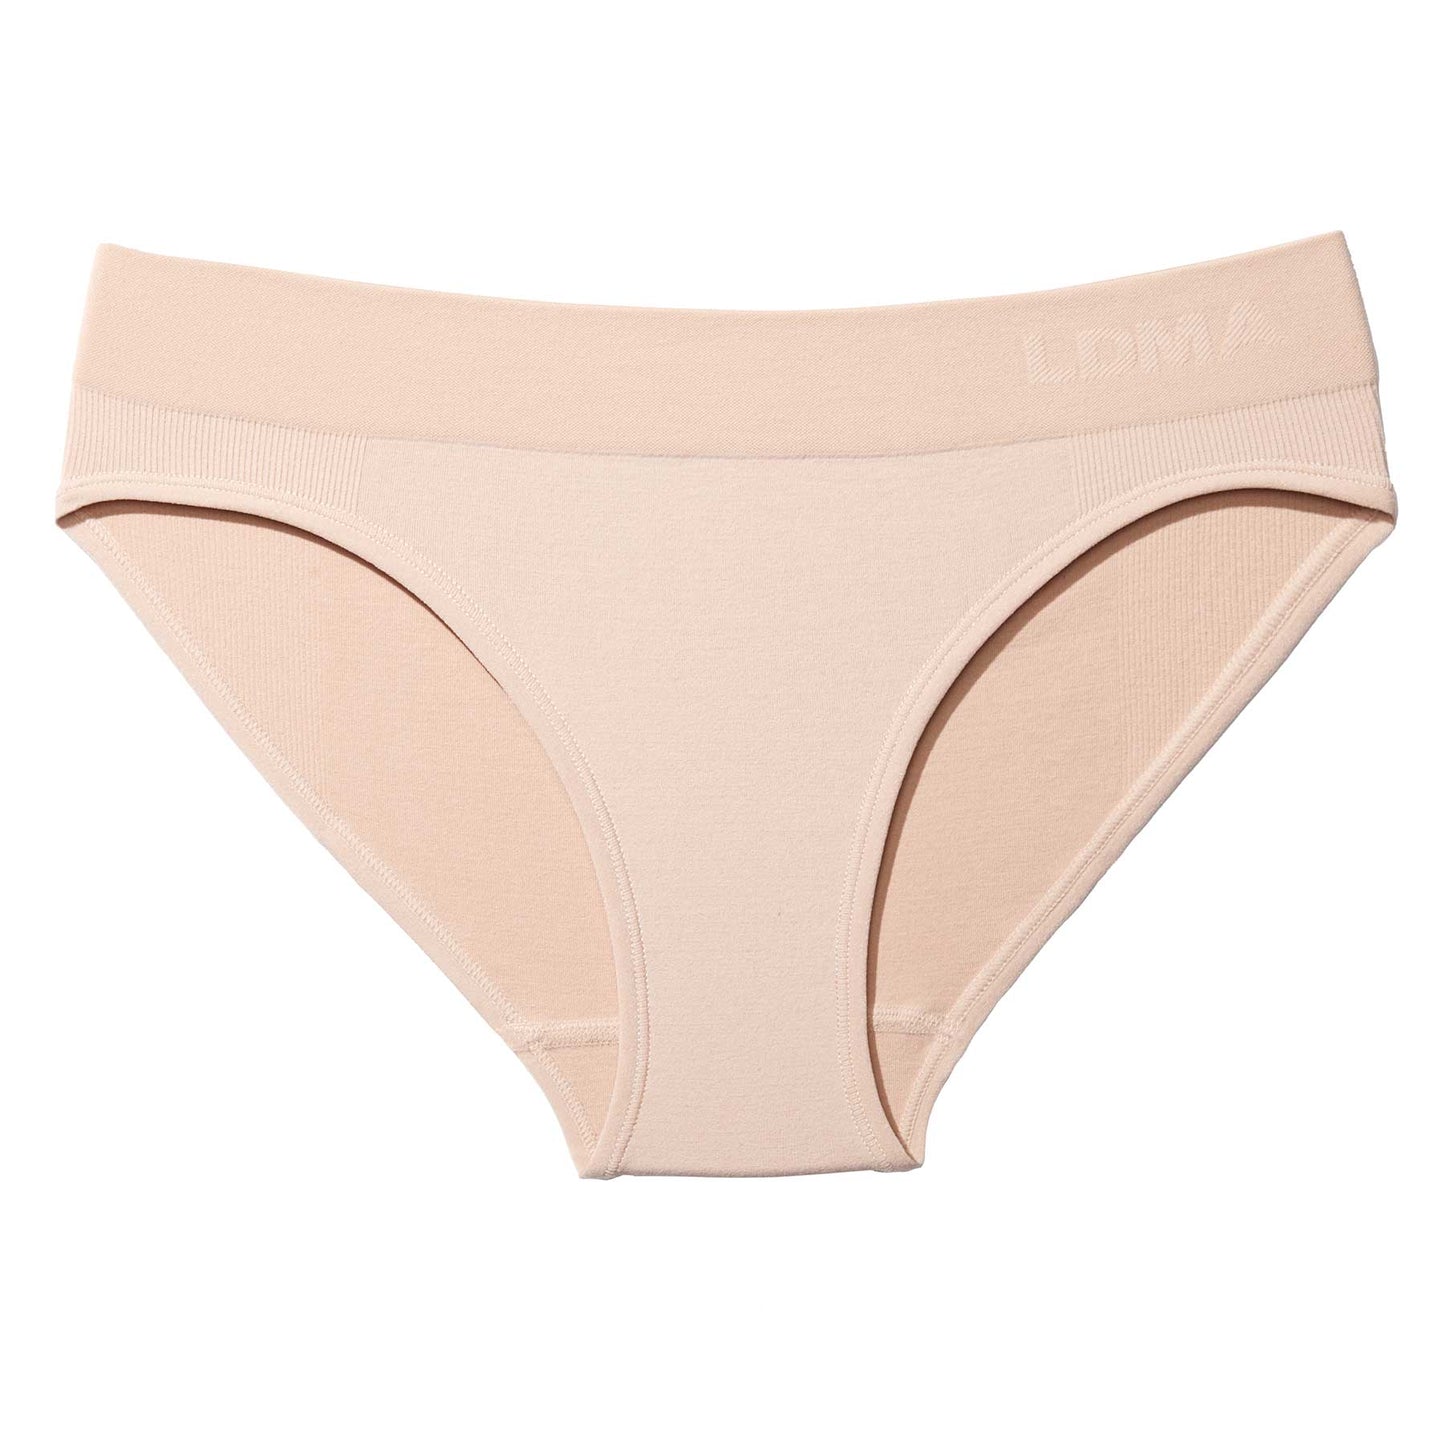 Low Hide Brief in Sand